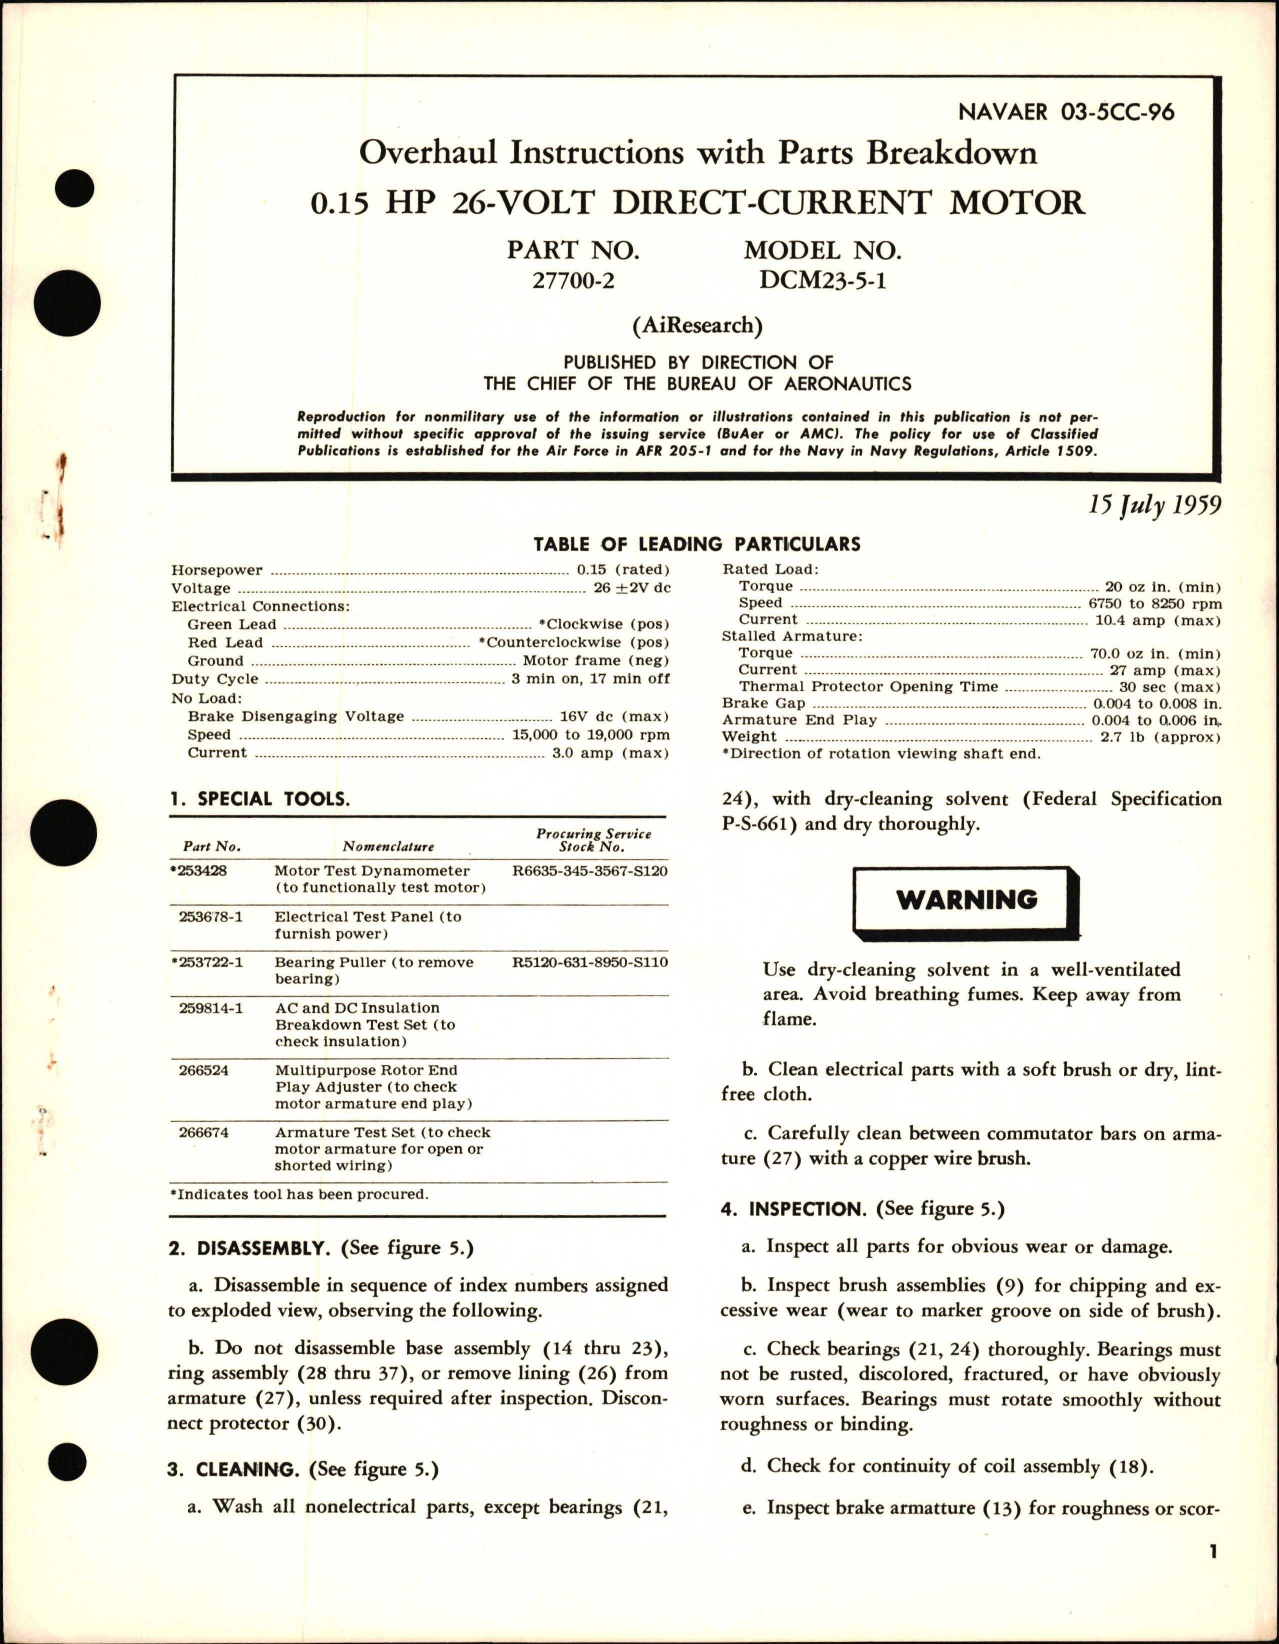 Sample page 1 from AirCorps Library document: Overhaul Instructions with Parts Breakdown for HP 26 Volt Direct Current Motor 0.15 - Part 27700-2 